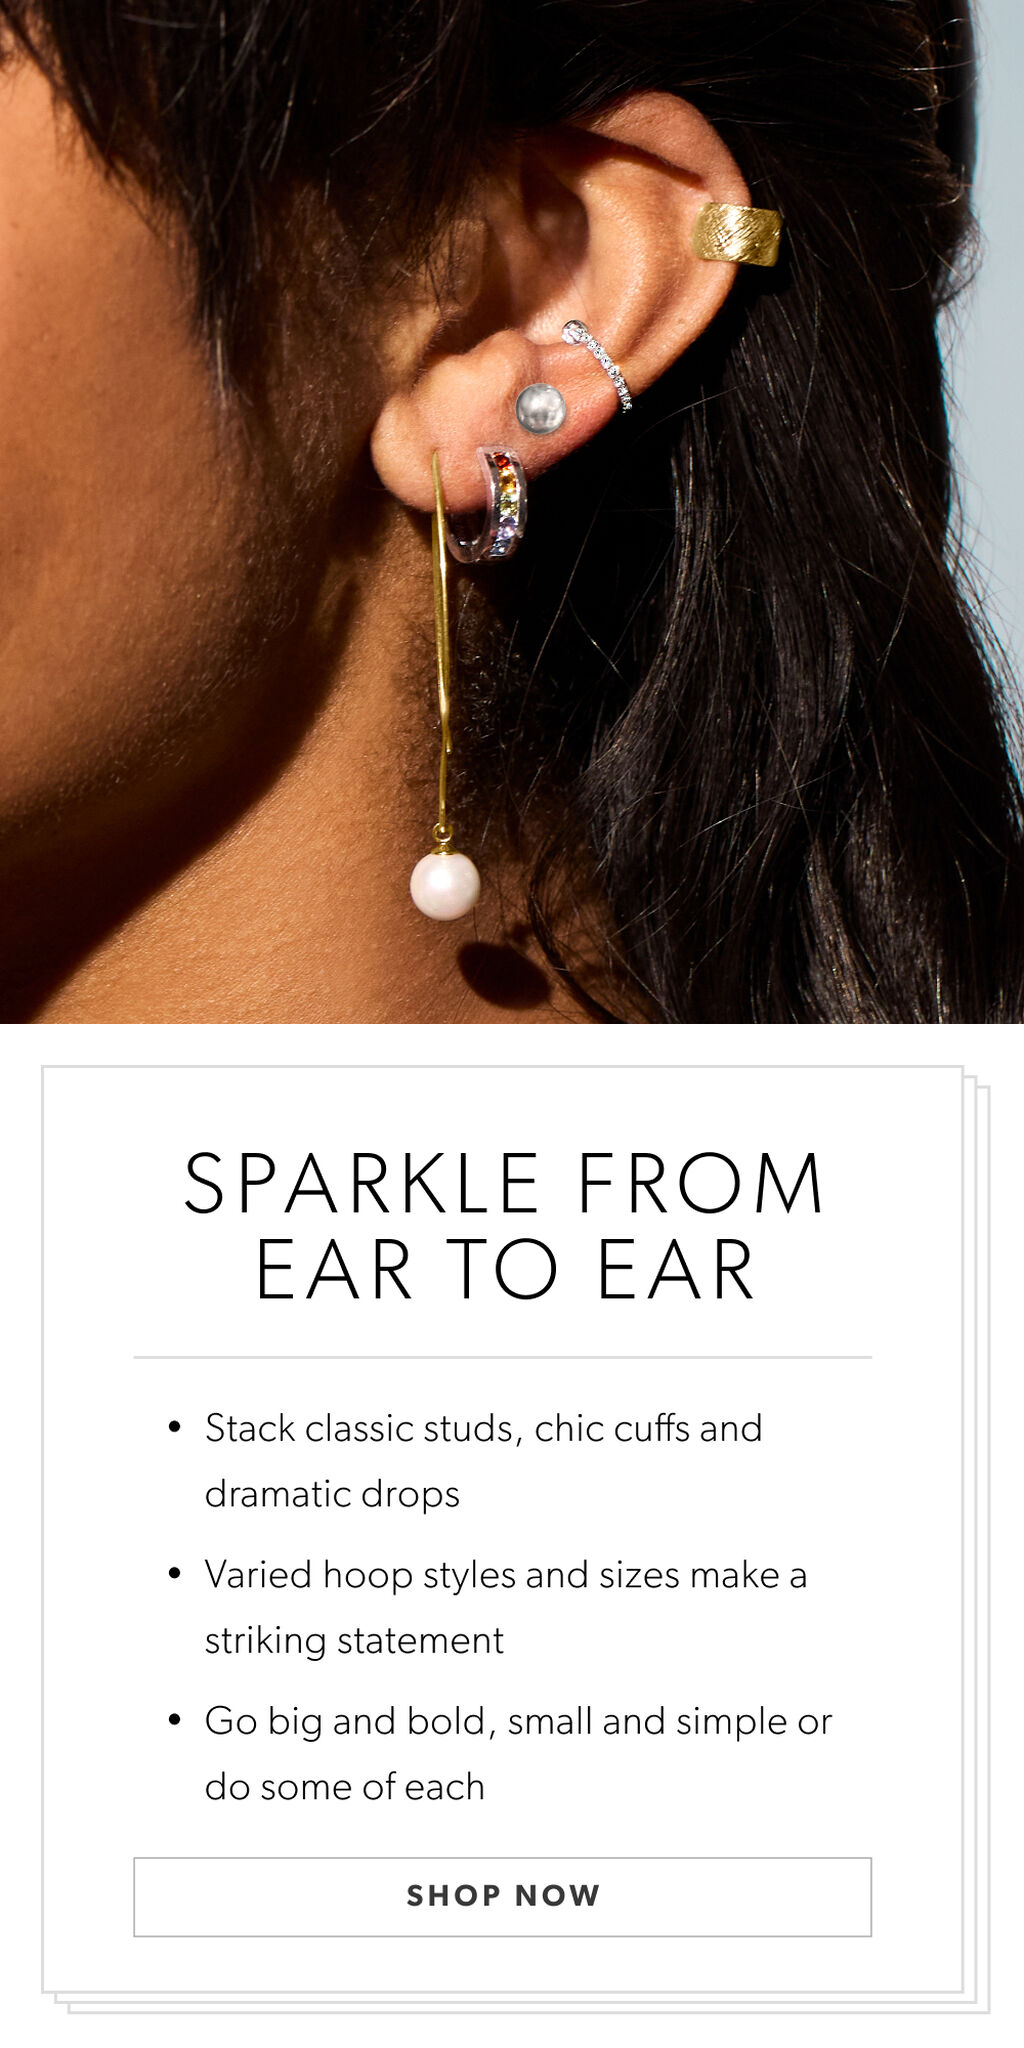 Sparkling From Ear To Ear